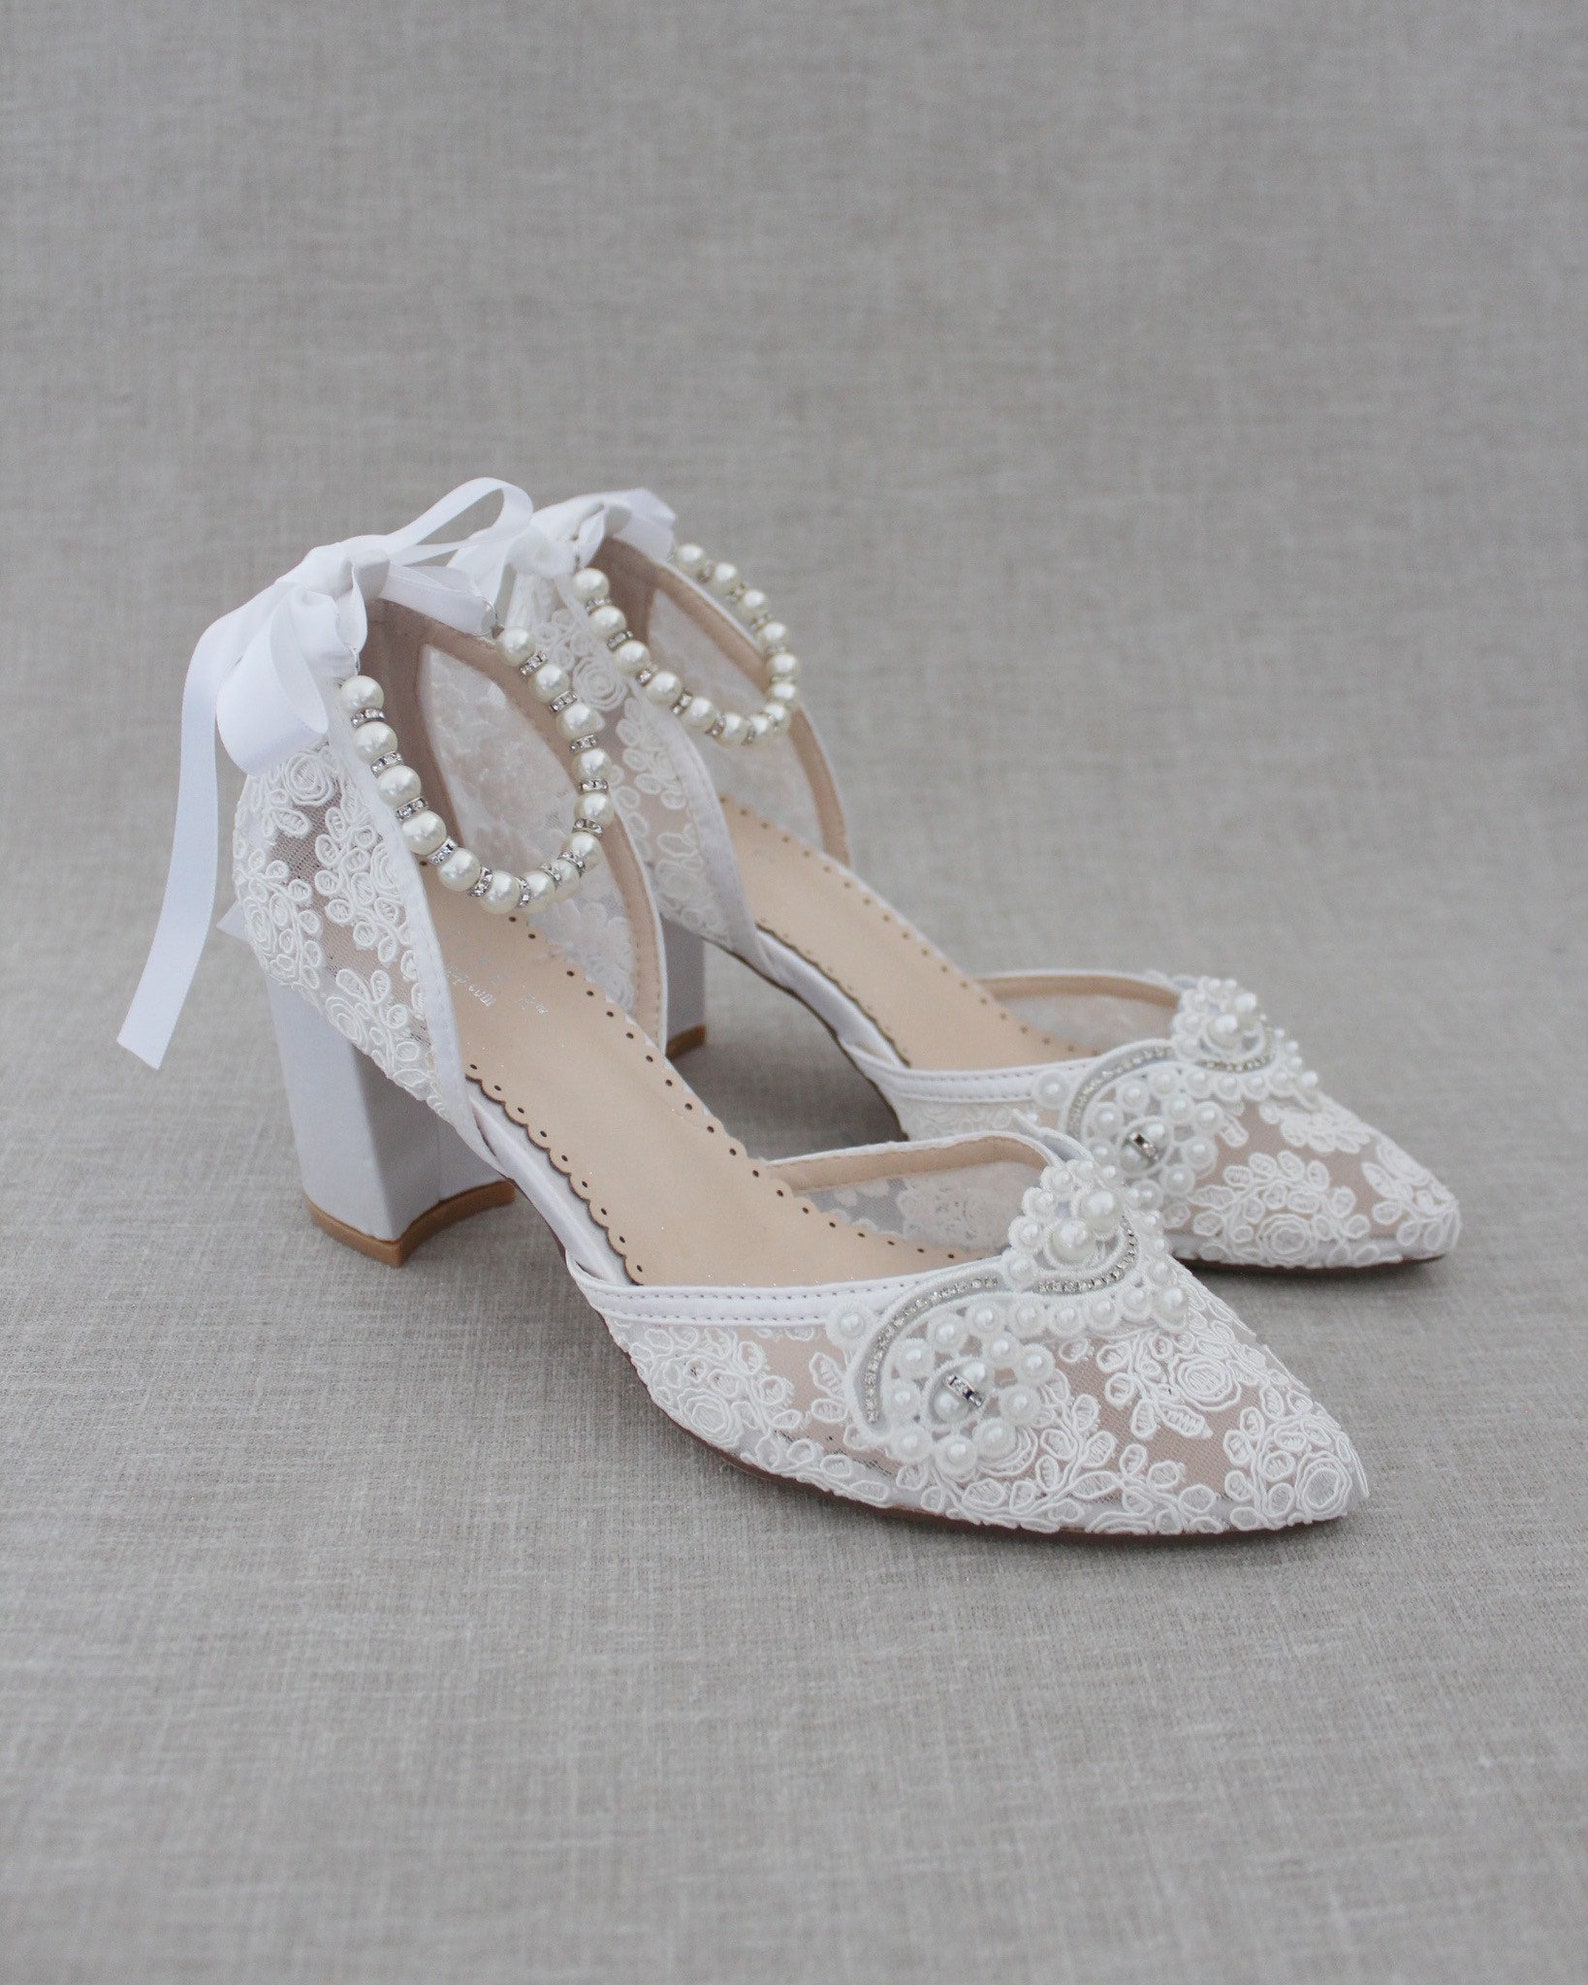 White Crochet Lace Almond Toe Block Heel With Small Pearls - Etsy